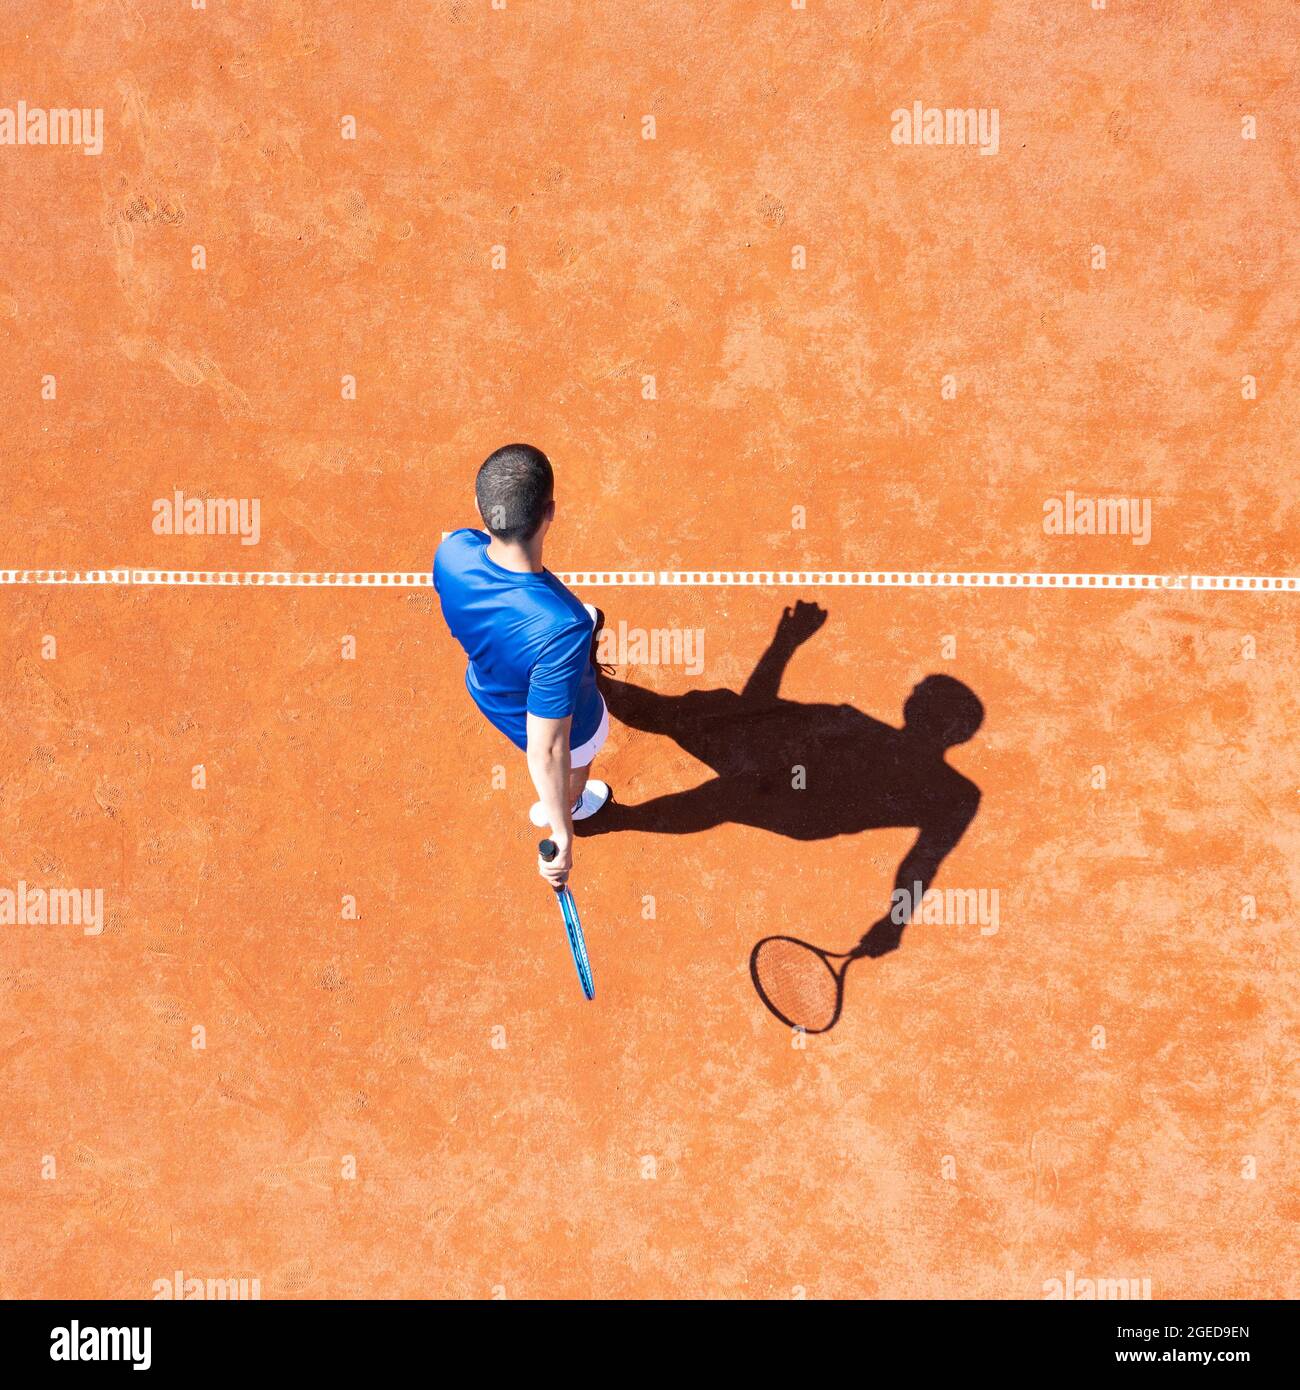 Aerial view of a professional tennis player preparing perform a first service Stock Photo